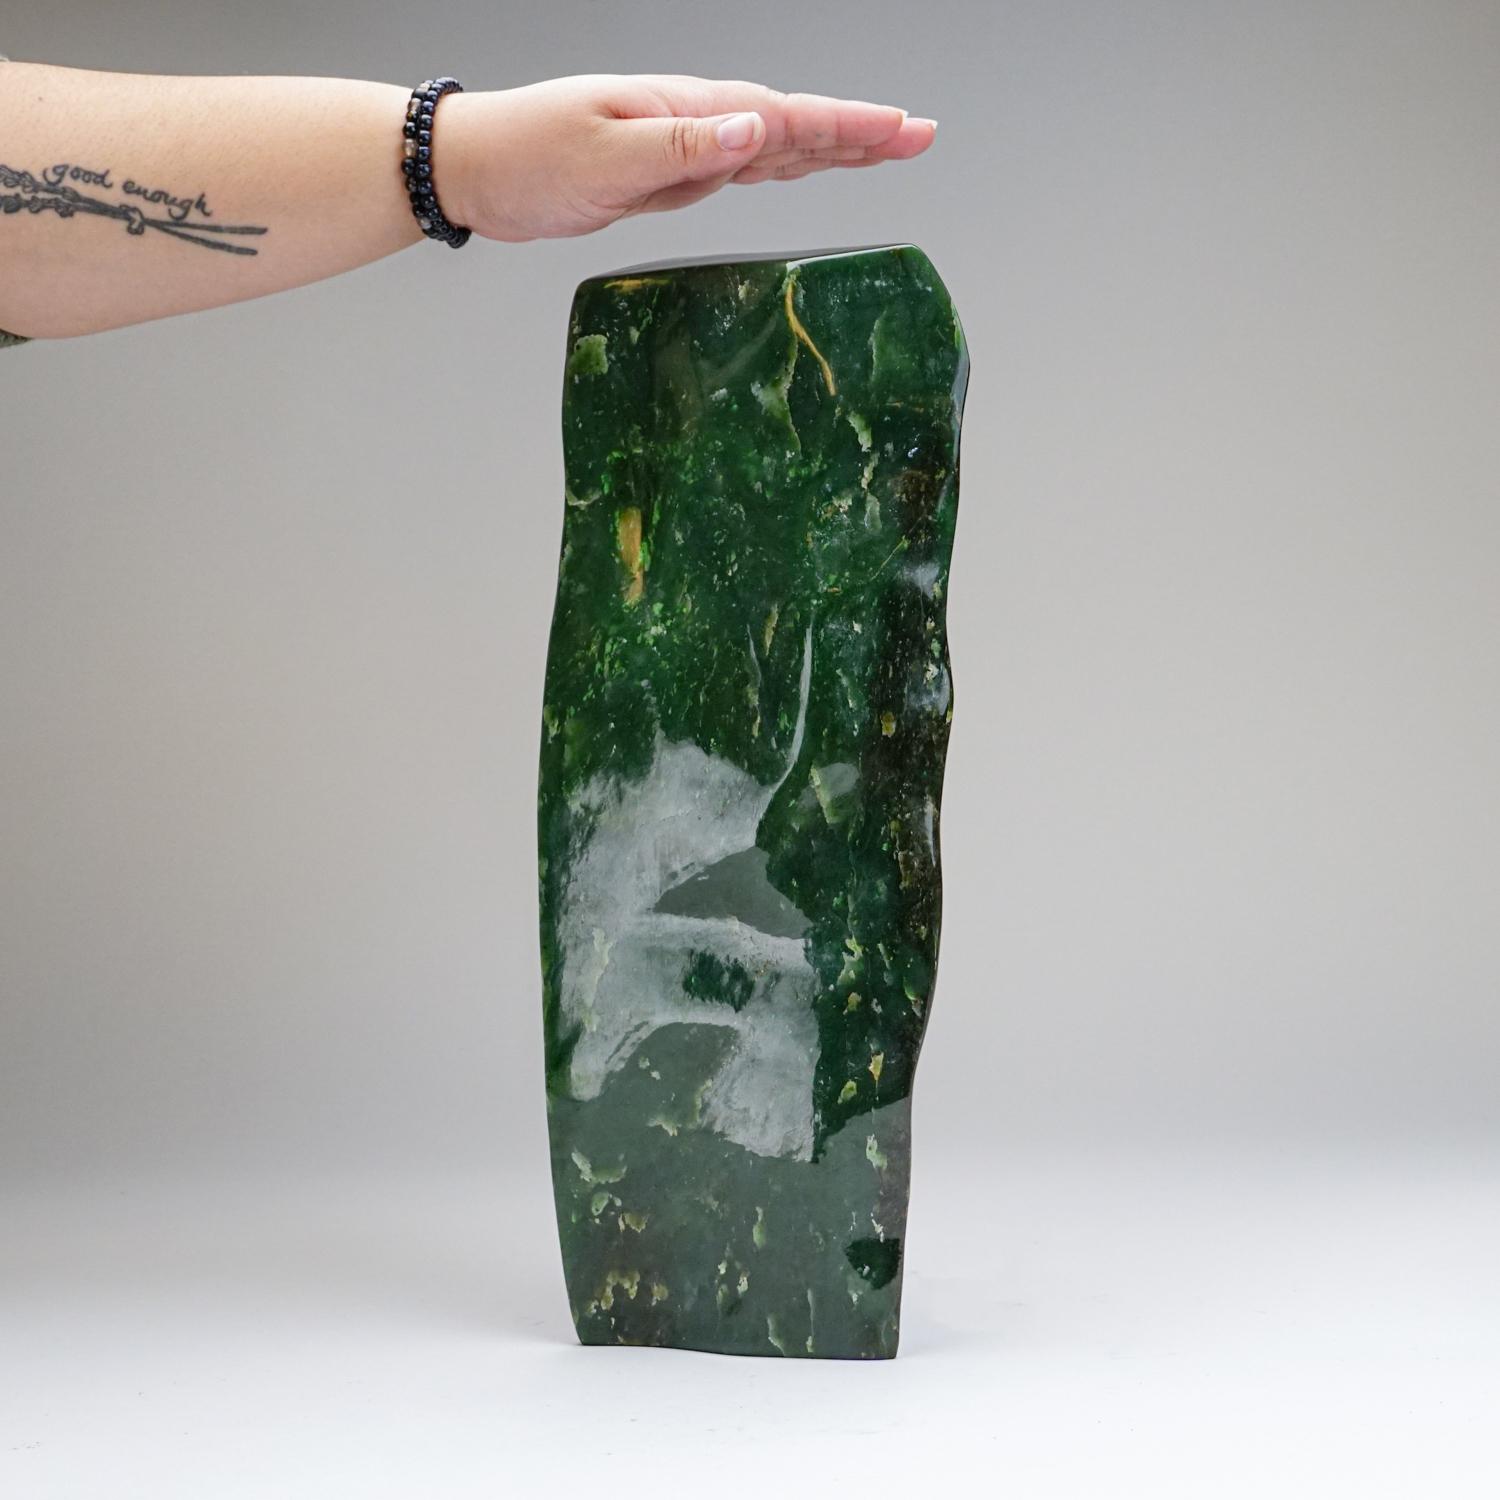 Contemporary Polished Nephrite Jade Freeform from Pakistan '20.8 Lbs'